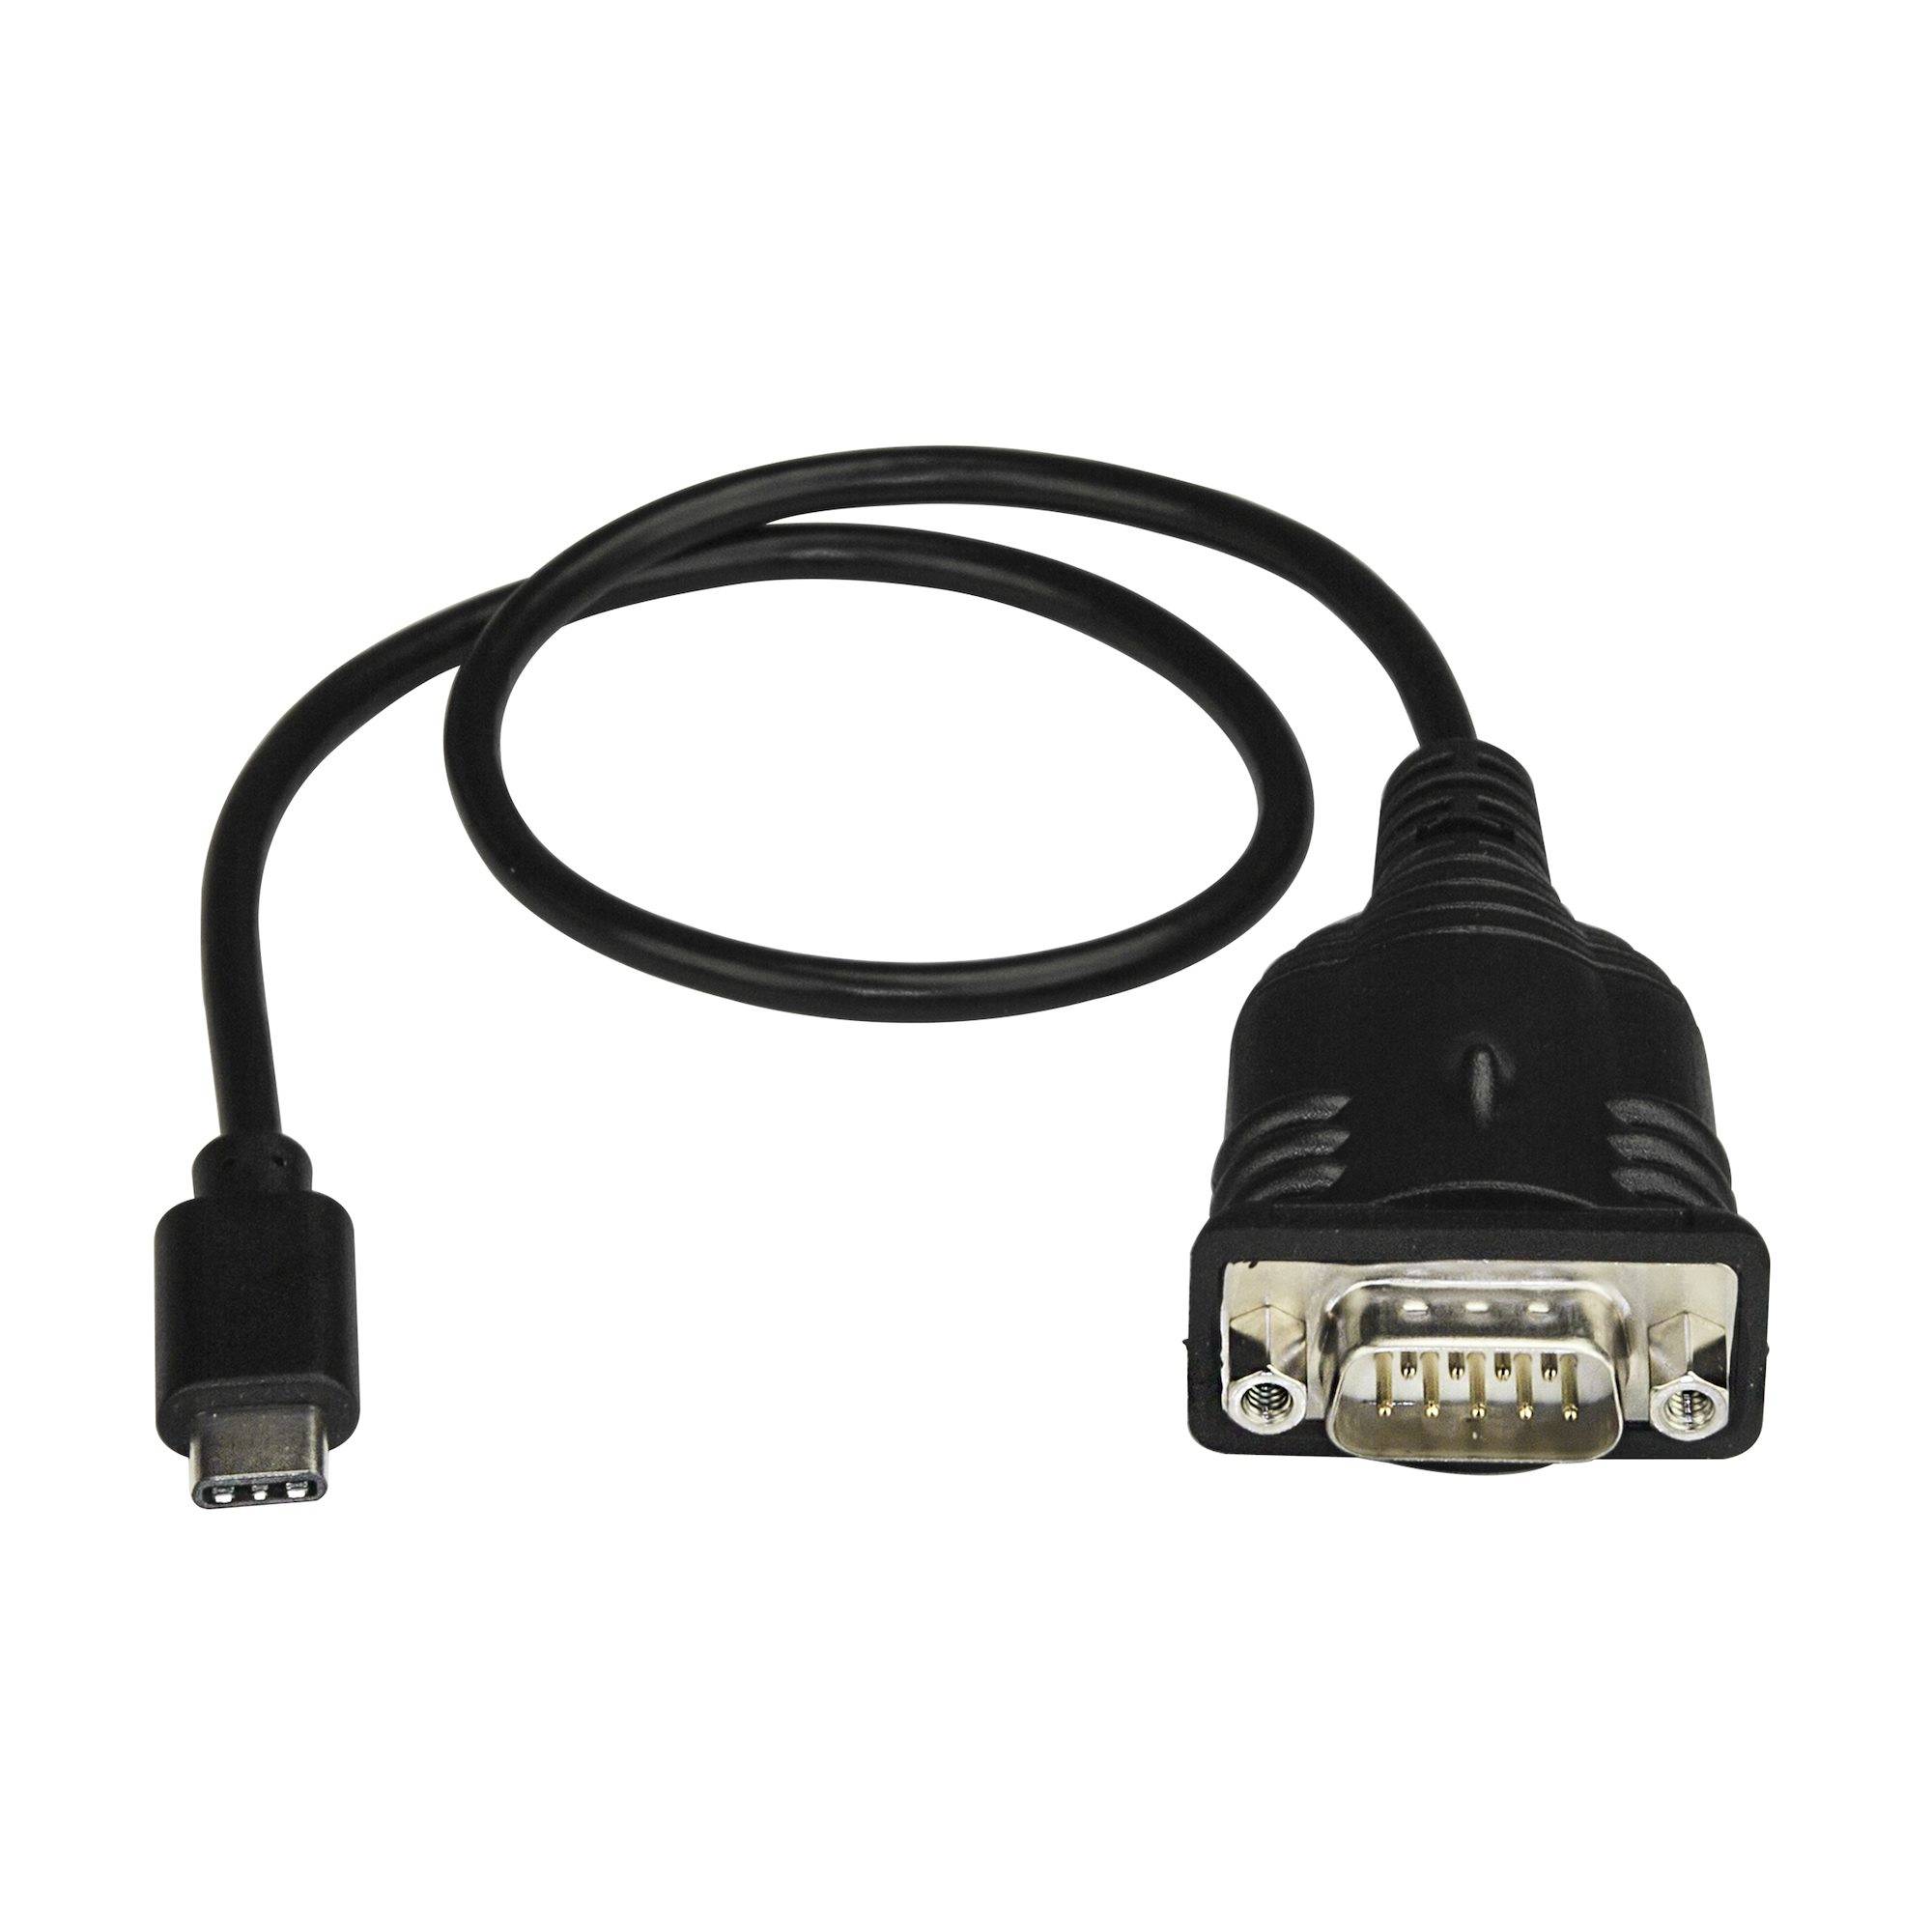 Rca Informatique - image du produit : UCB C TO SERIAL ADAPTER USB C TO RS232 CABLE